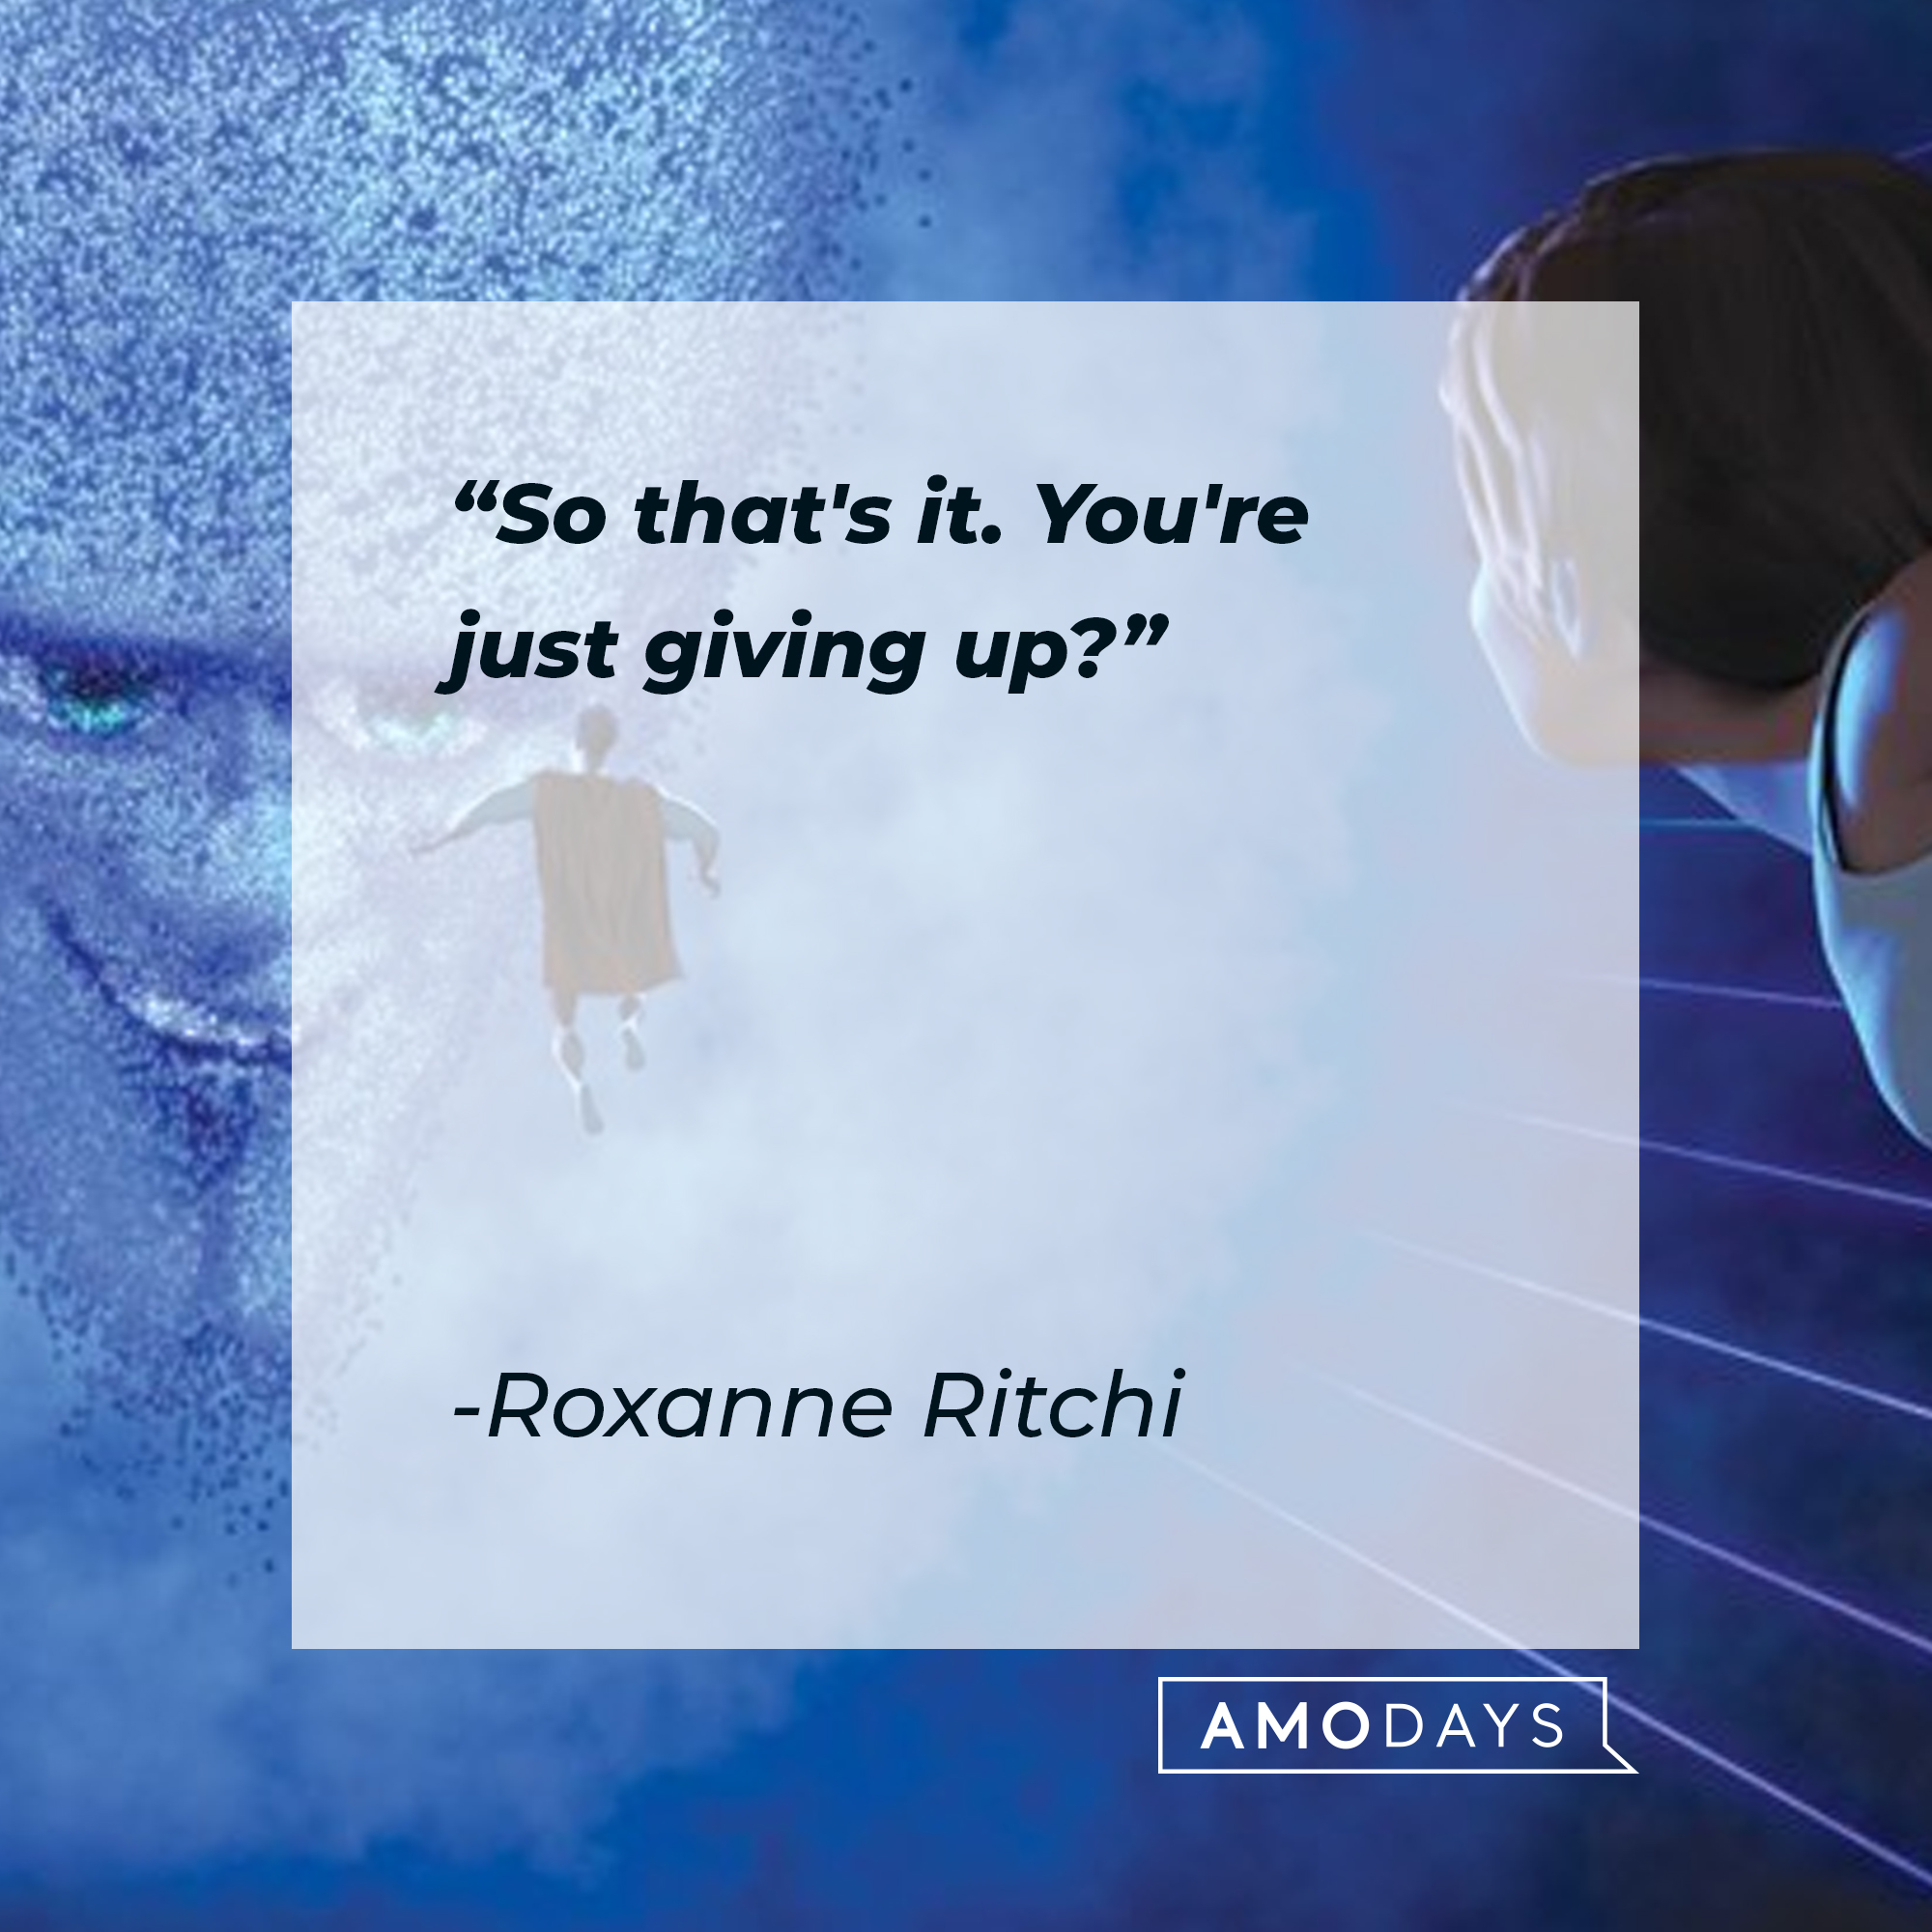 Roxanne Ritchi's quote: "So that's it. You're just giving up?" | Source: Facebook.com/MegamindUK